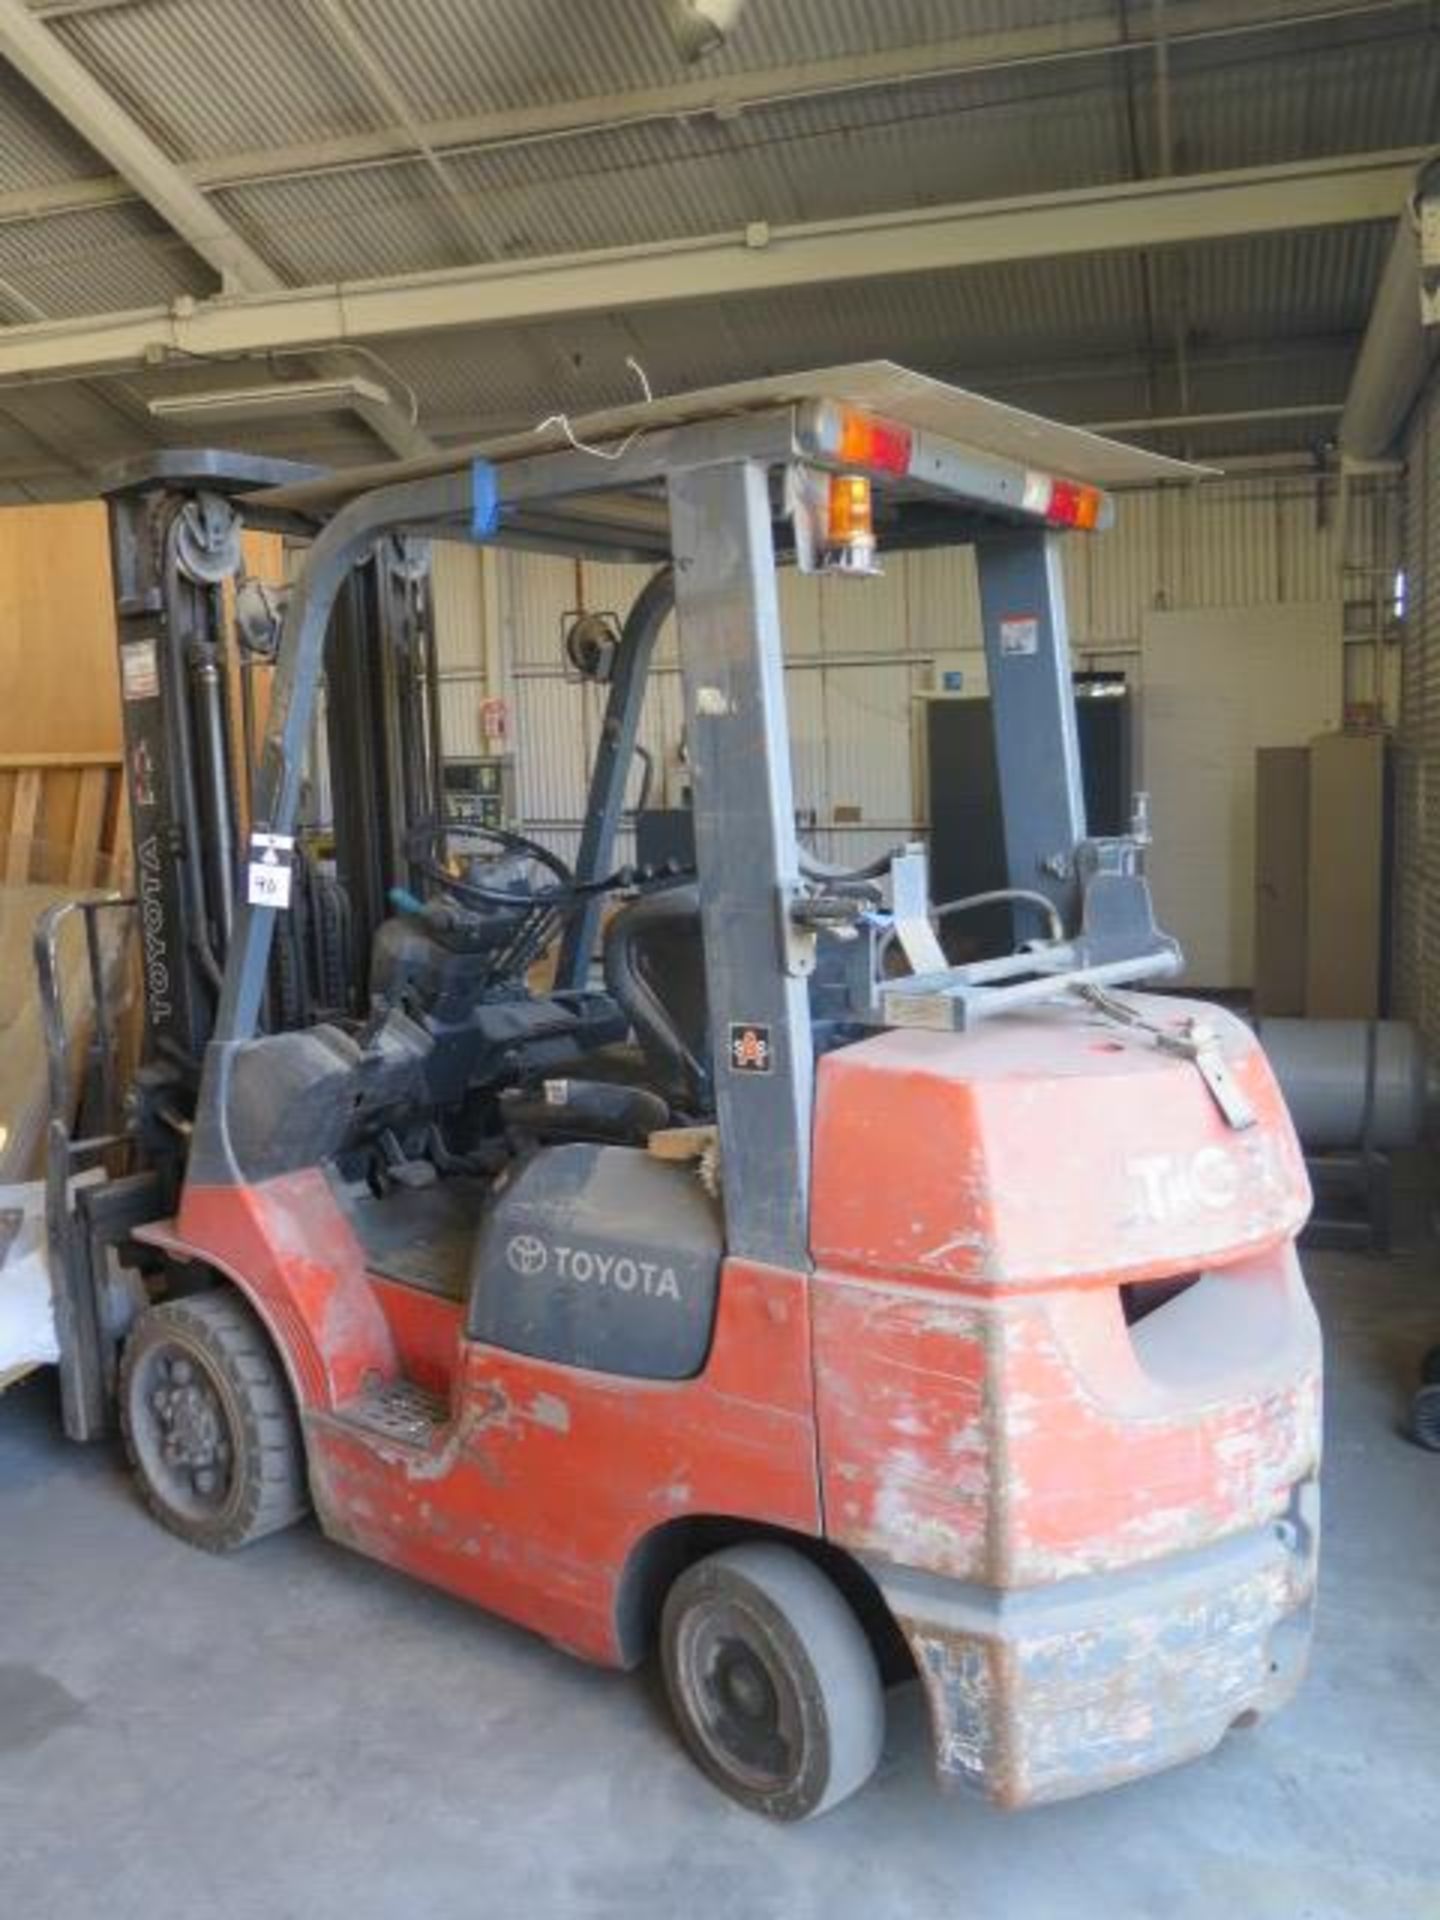 Toyota 7FGCU30 4750 Lb Cap LPG Forklift s/n 60080 w/ 3-Stage Mast, 188” Lift, Side Shift, SOLD AS IS - Image 2 of 13